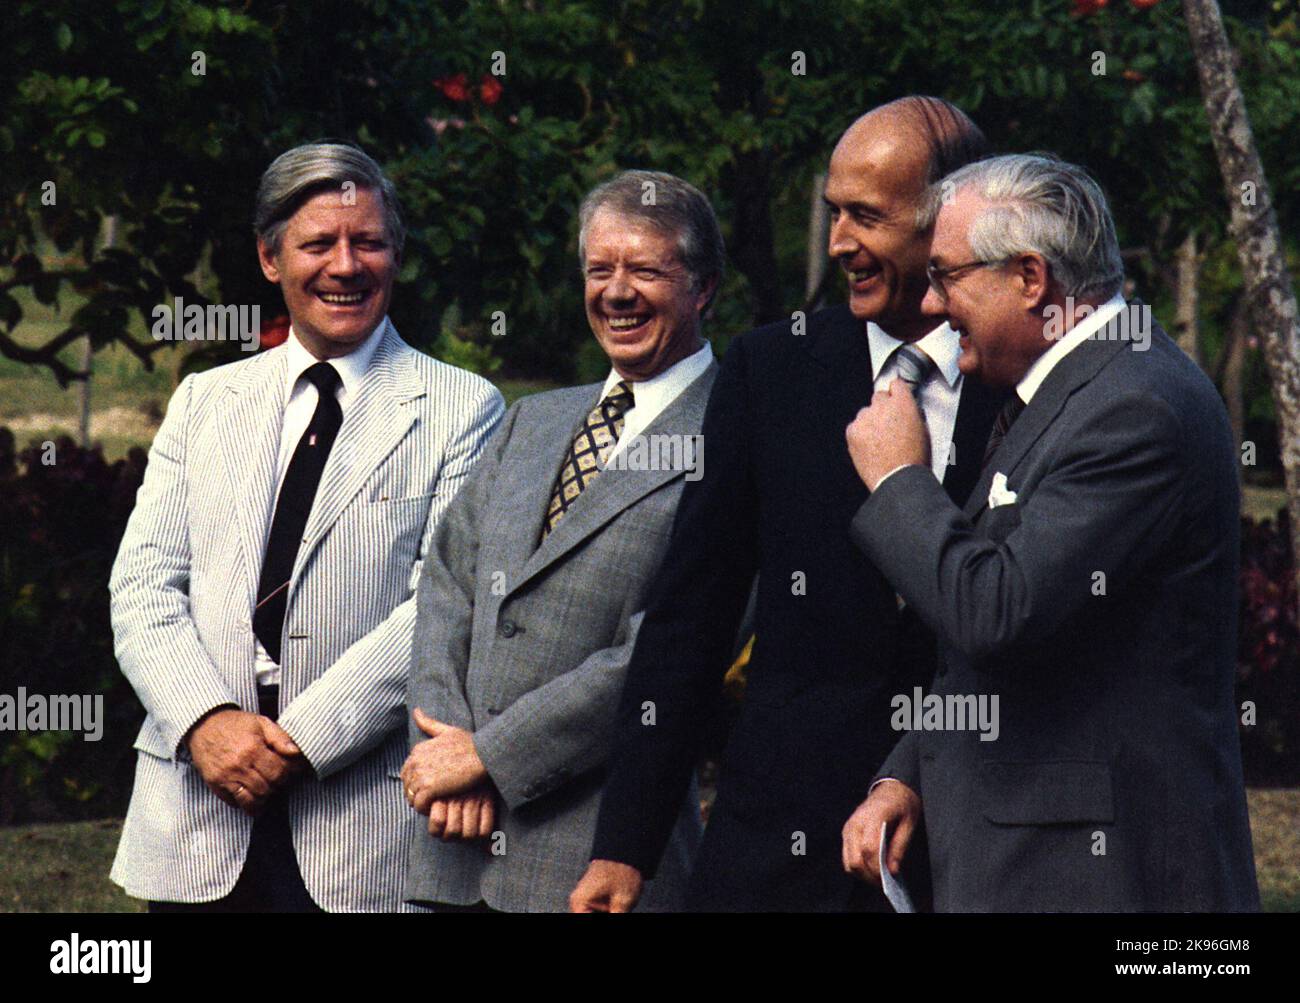 James Callaghan (right) with Helmut Schmidt, Jimmy Carter and Valéry Giscard d'Estaing in Guadeloupe, 1979 Stock Photo